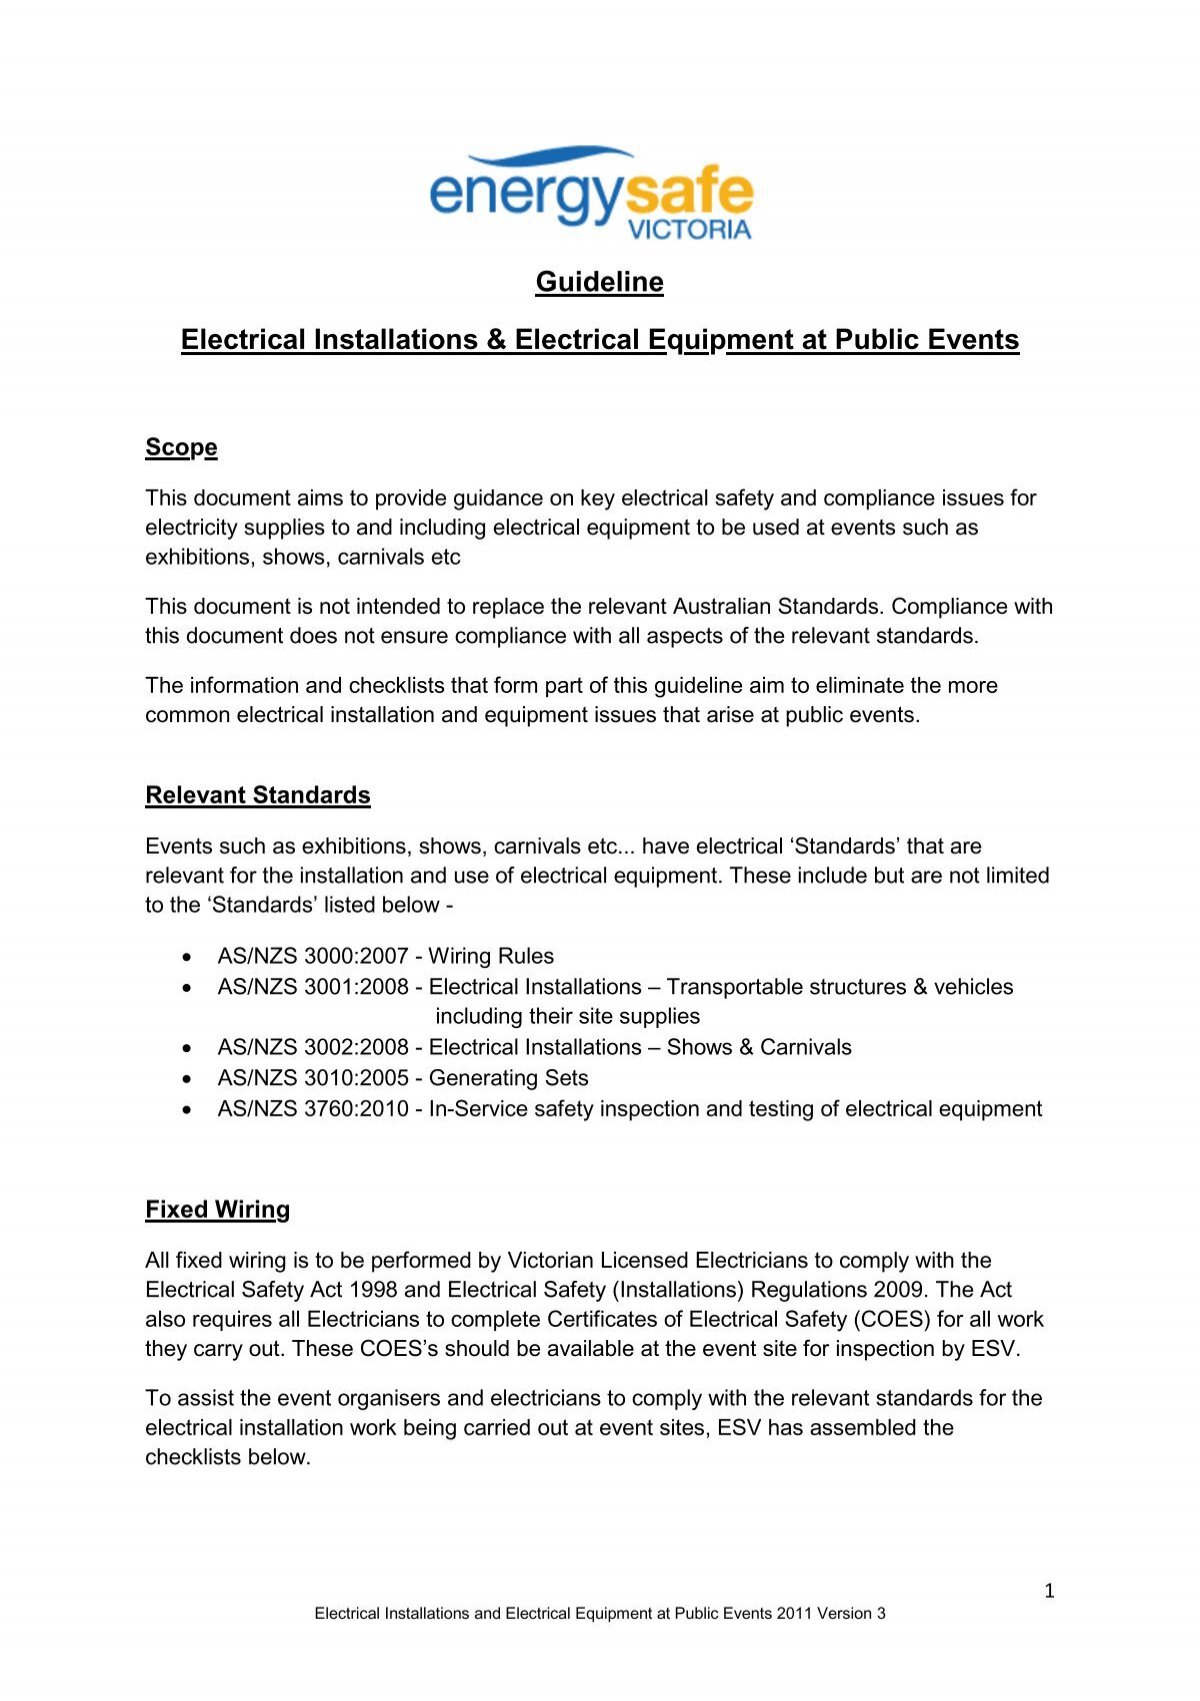 Electrical installations &amp; equipment public events